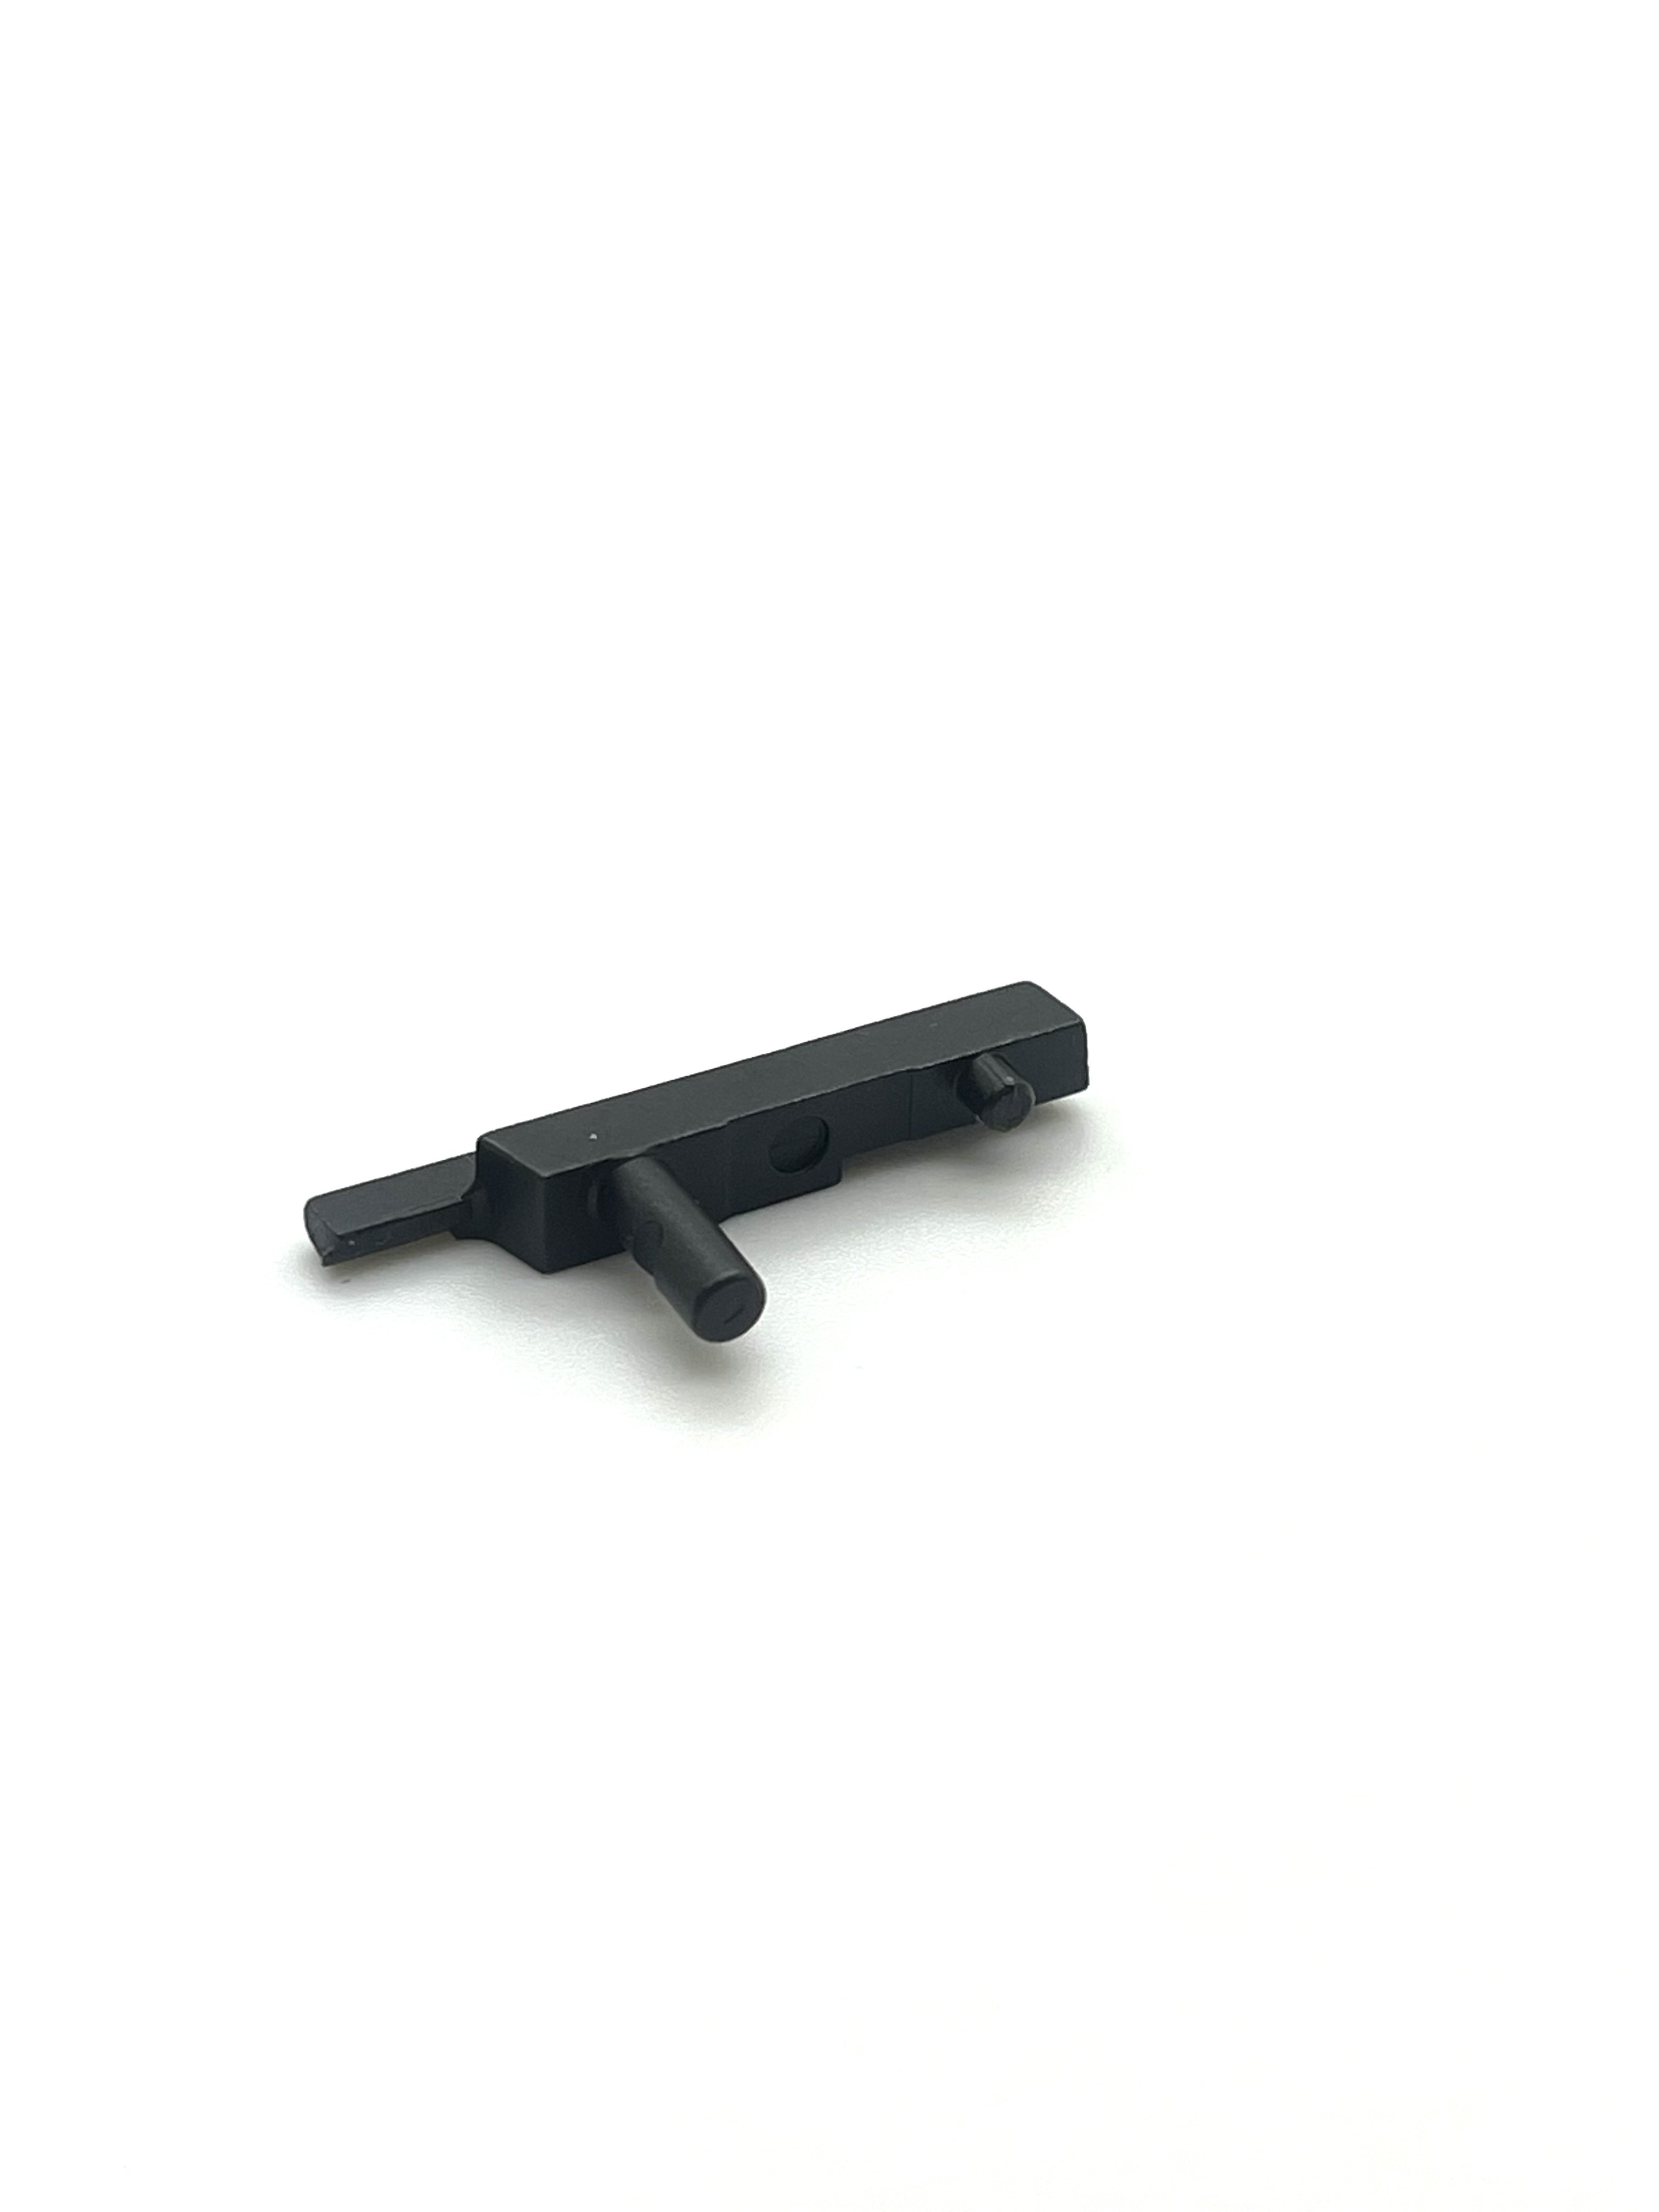 Ejector 9mm extended black